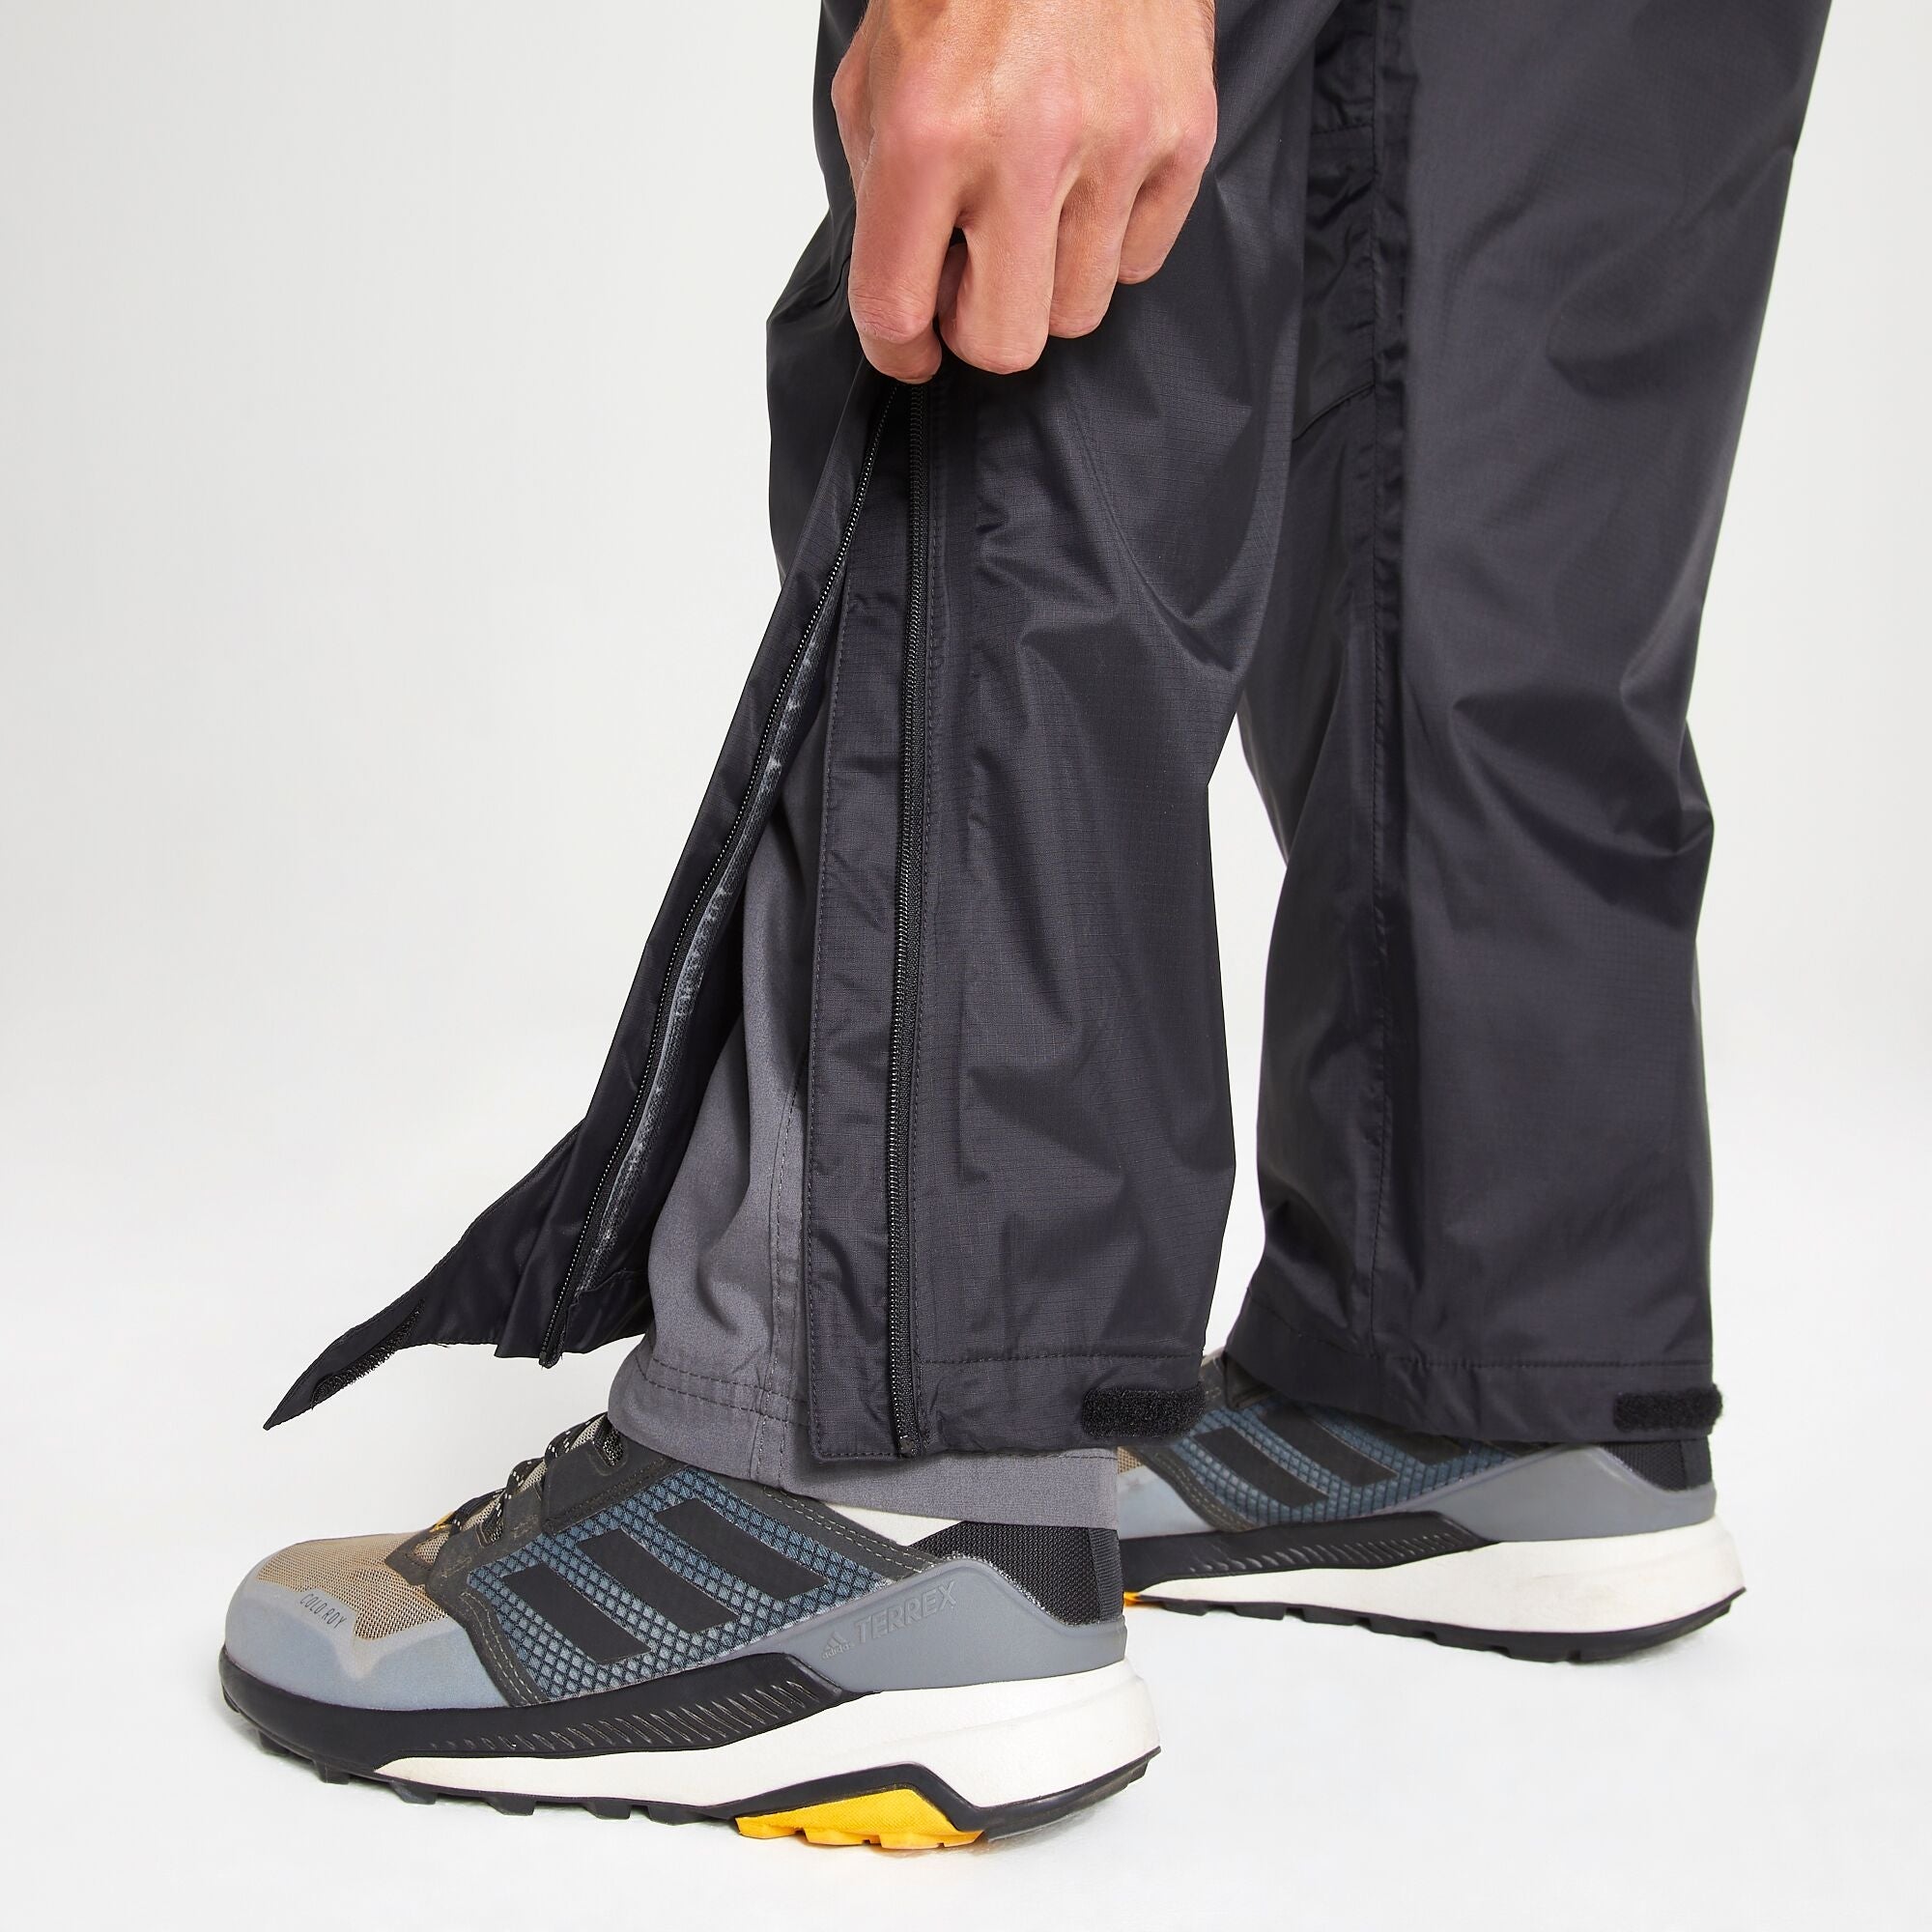 Perse Outdoor Pursuits Waterproof Trouser